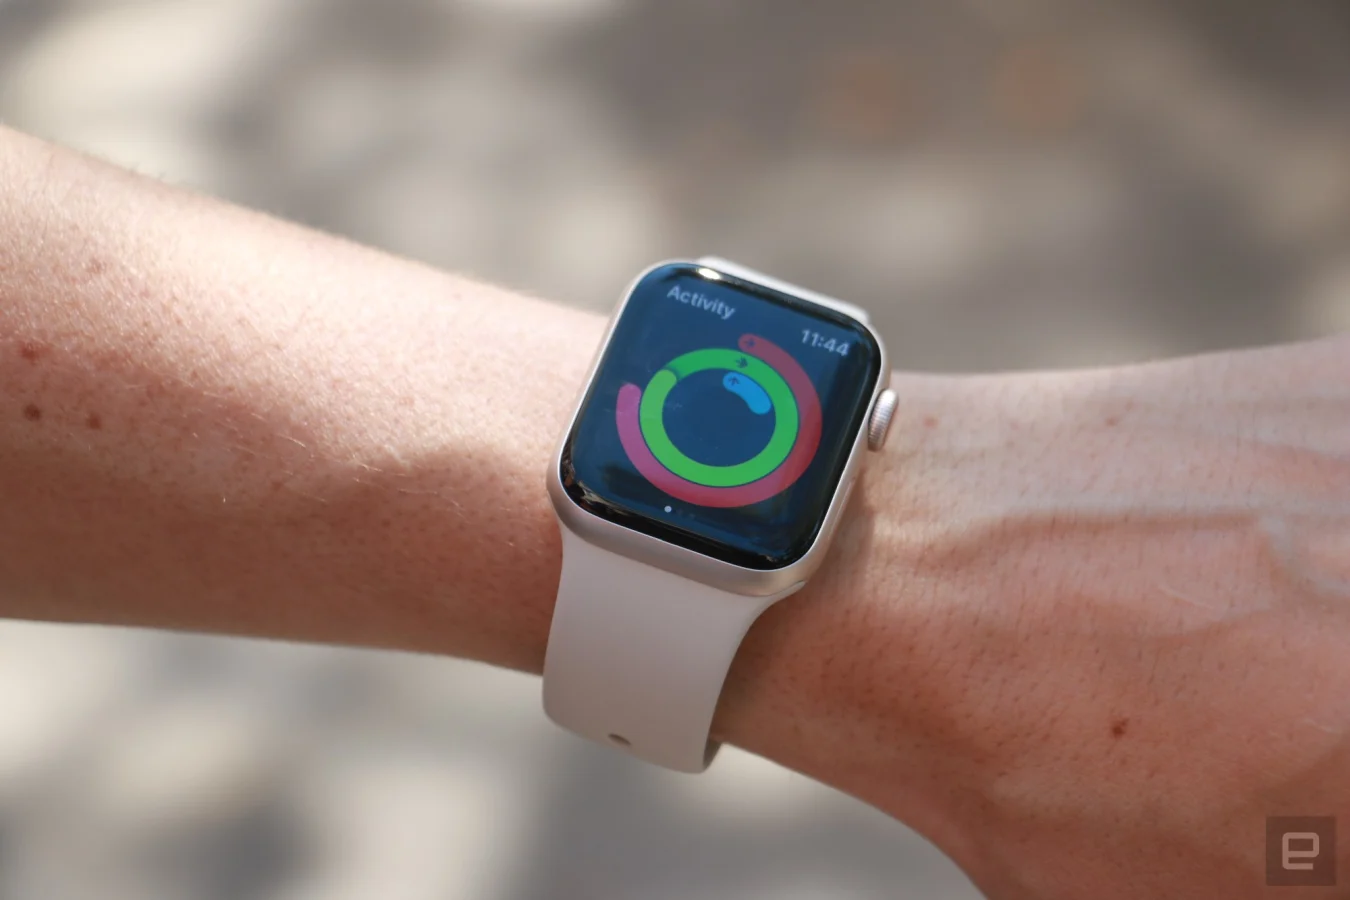 Apple Watch SE (2022) on a person's wrist, showing the Activity and ringing apps.